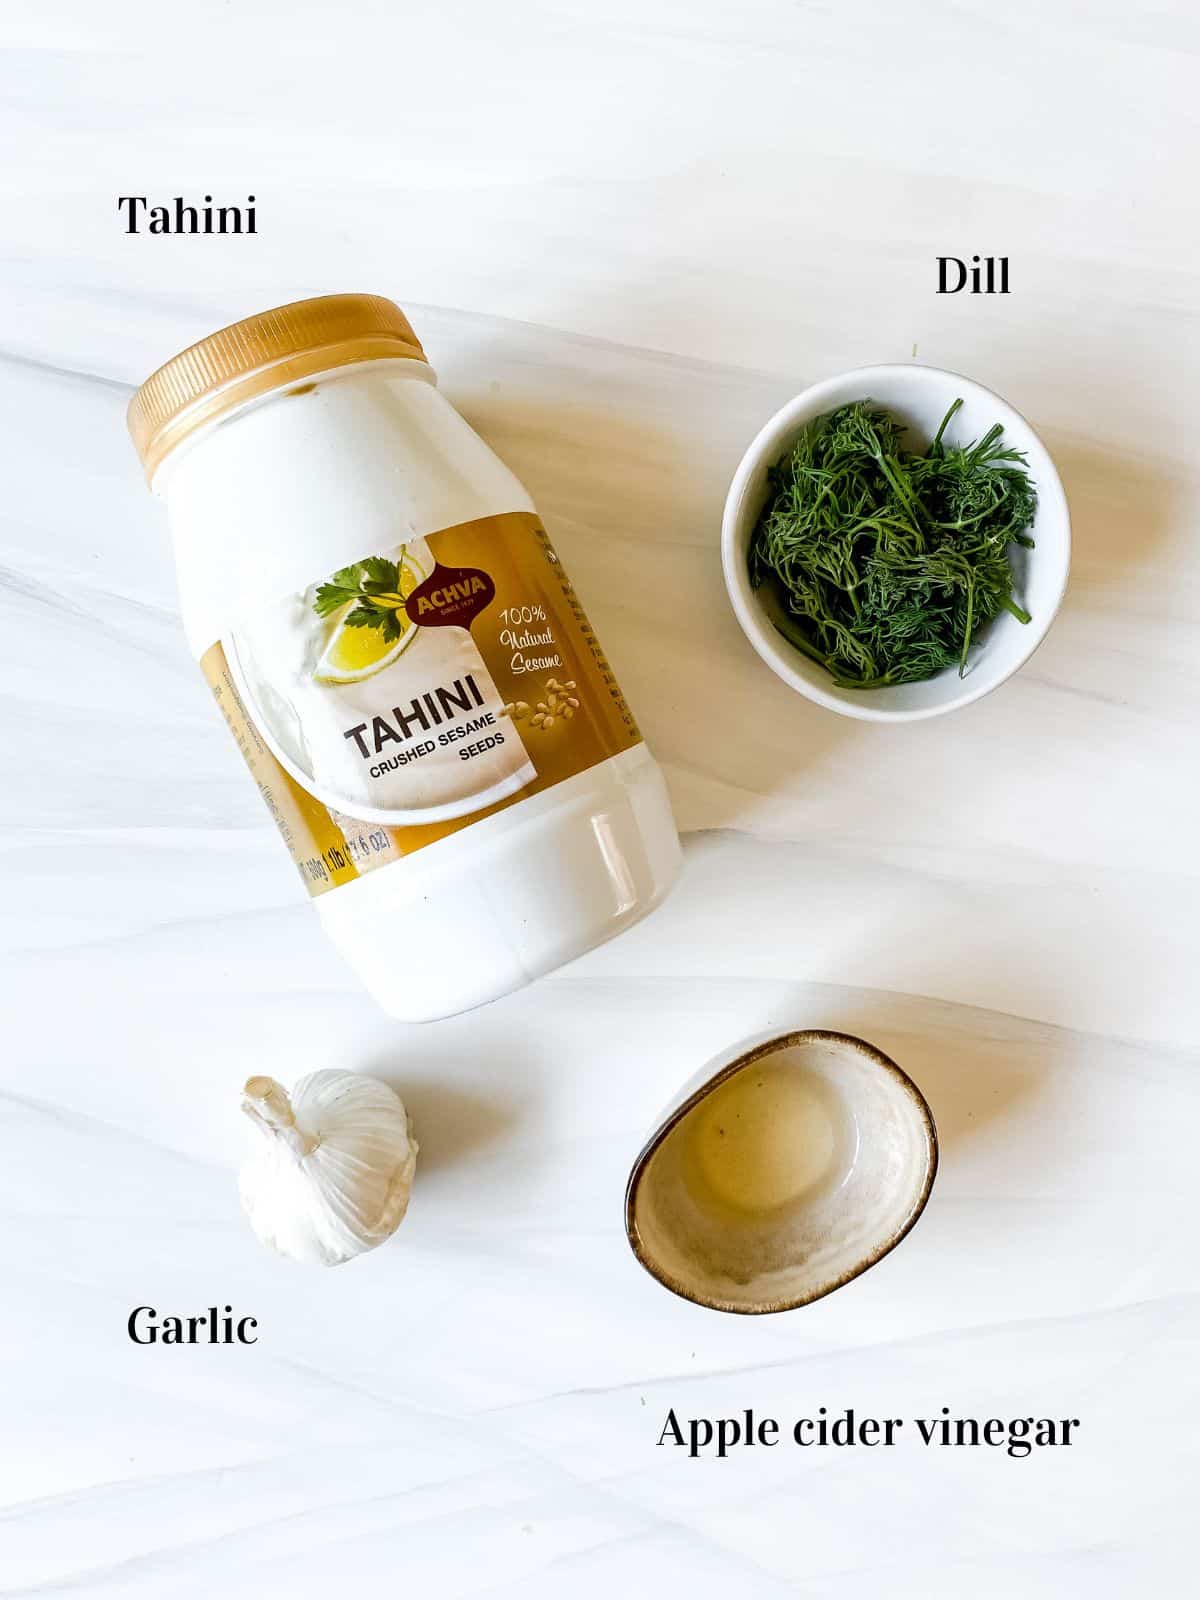 individually labelled ingredients of tahini, dill, apple cider vinegar and garlic.